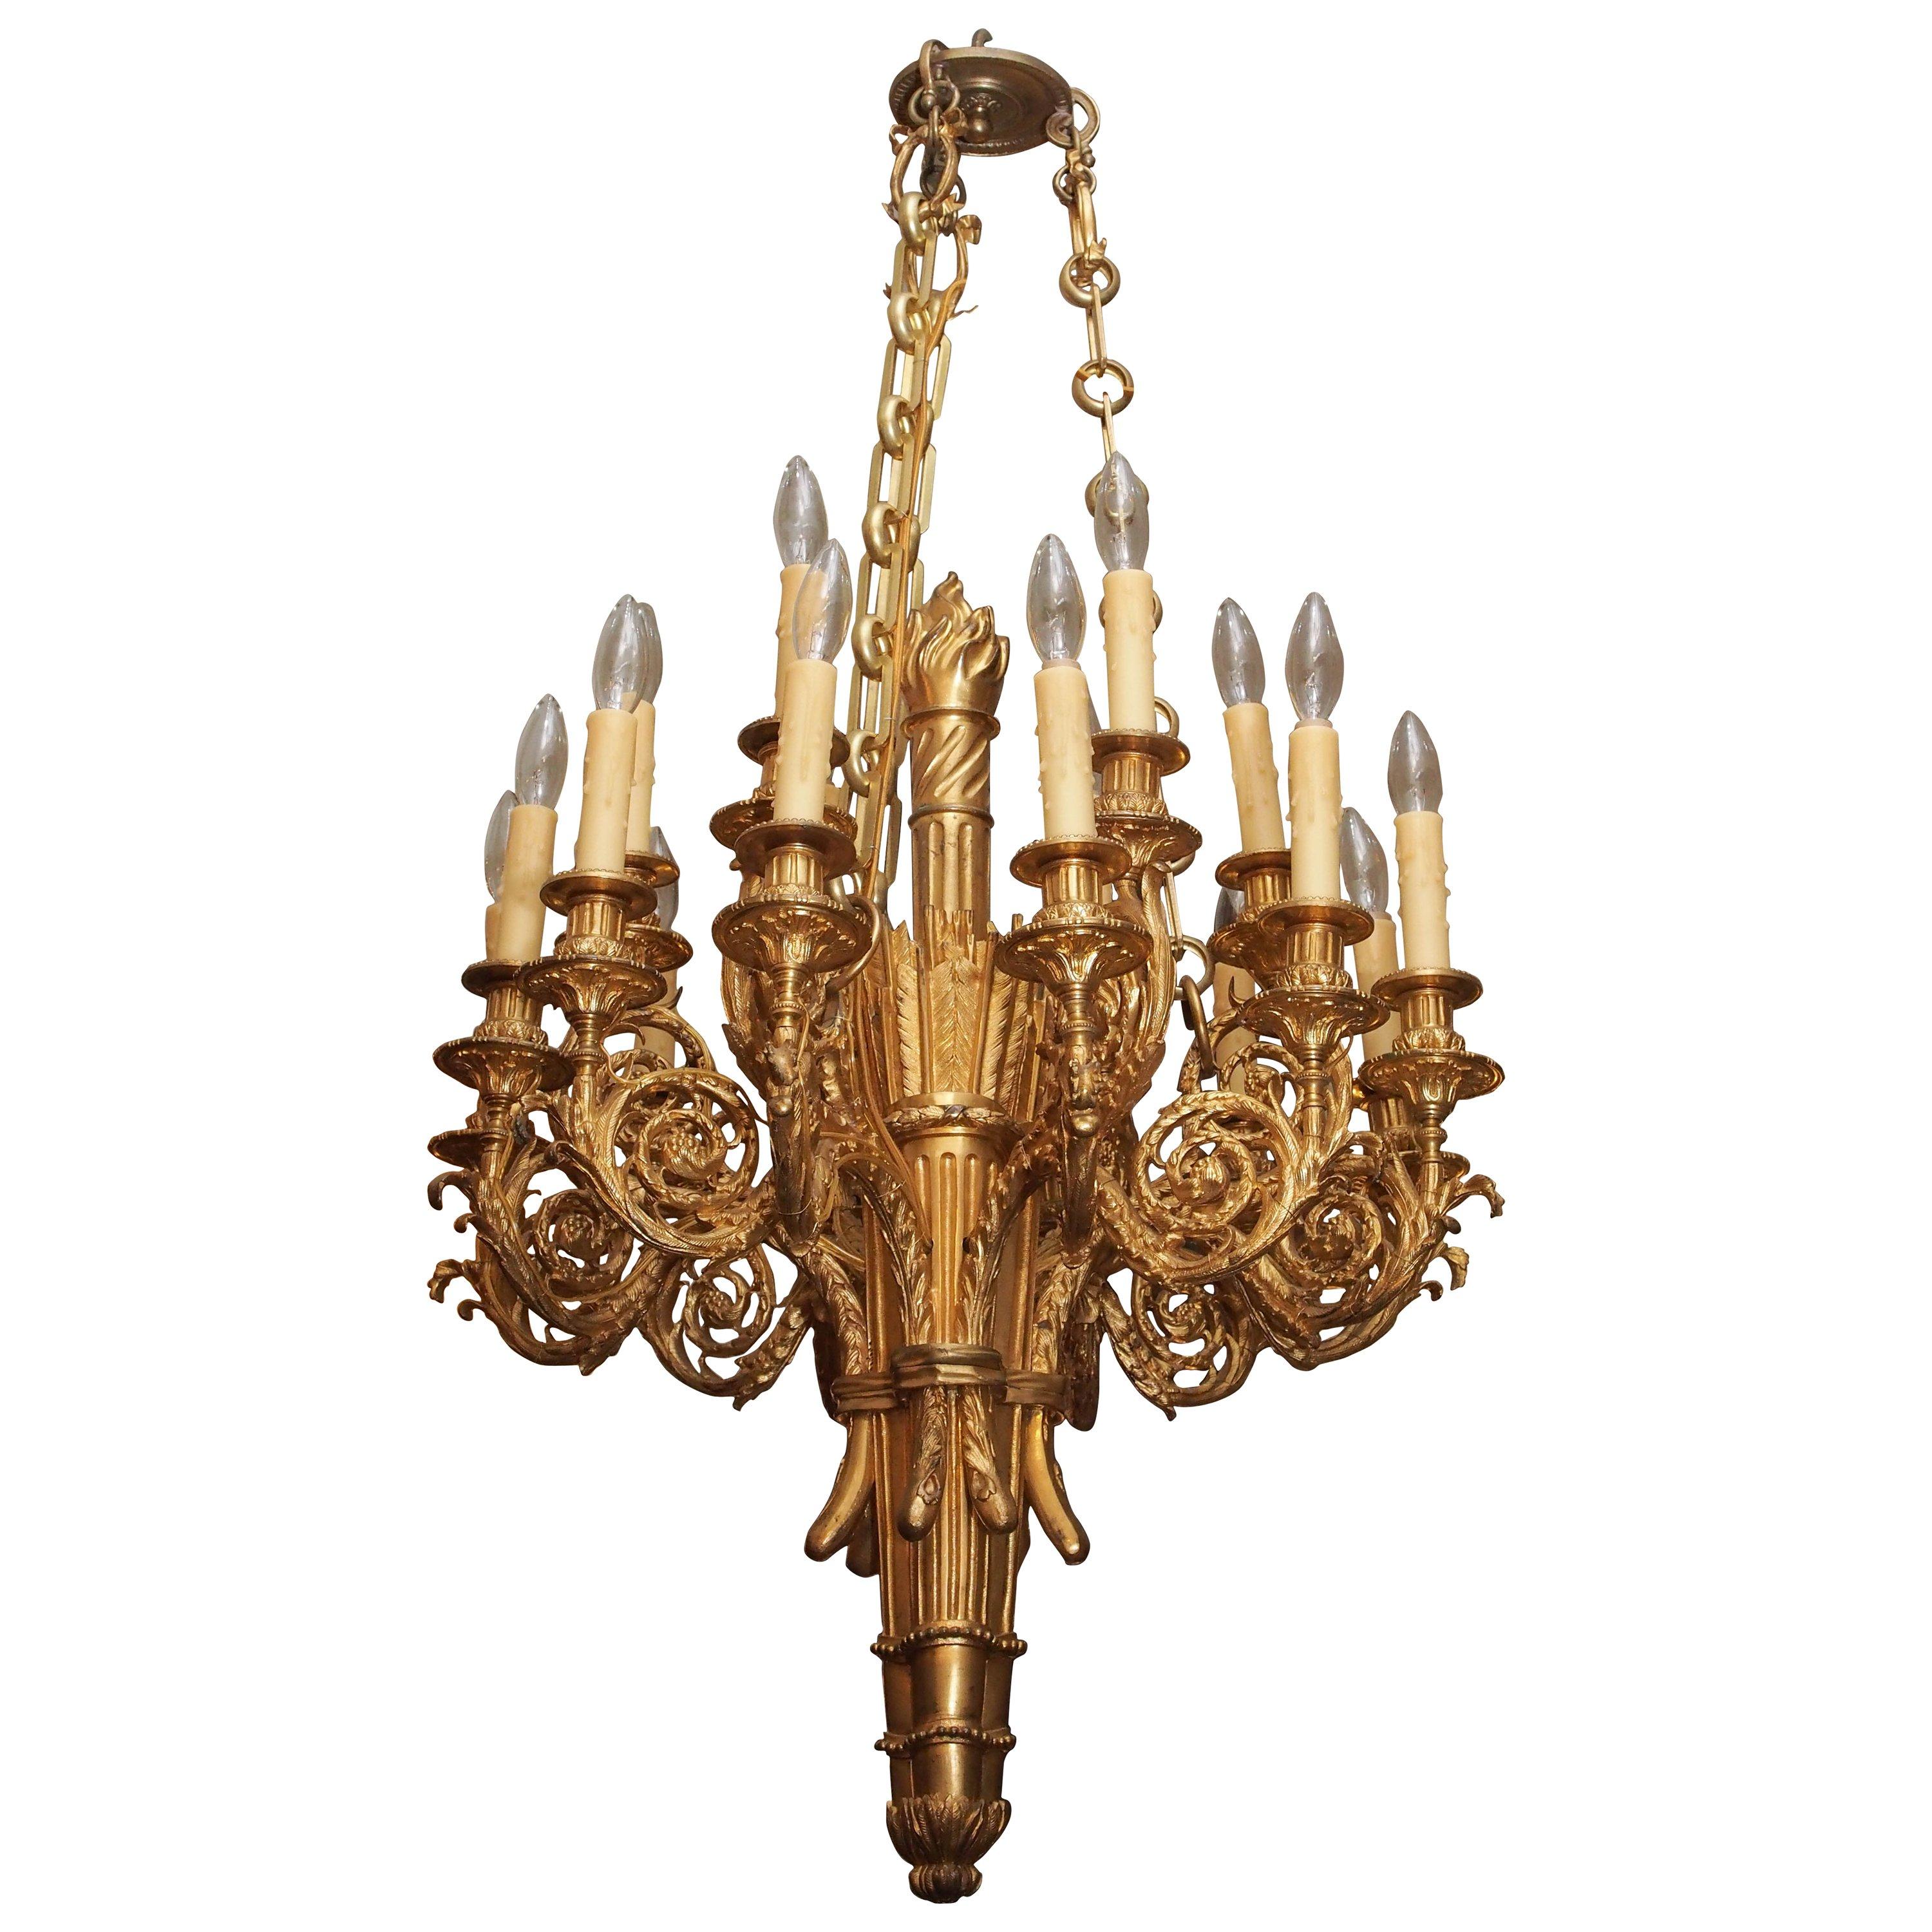 19th Century French Gilt Bronze Louis XVI Style Chandelier with Eighteen Lights